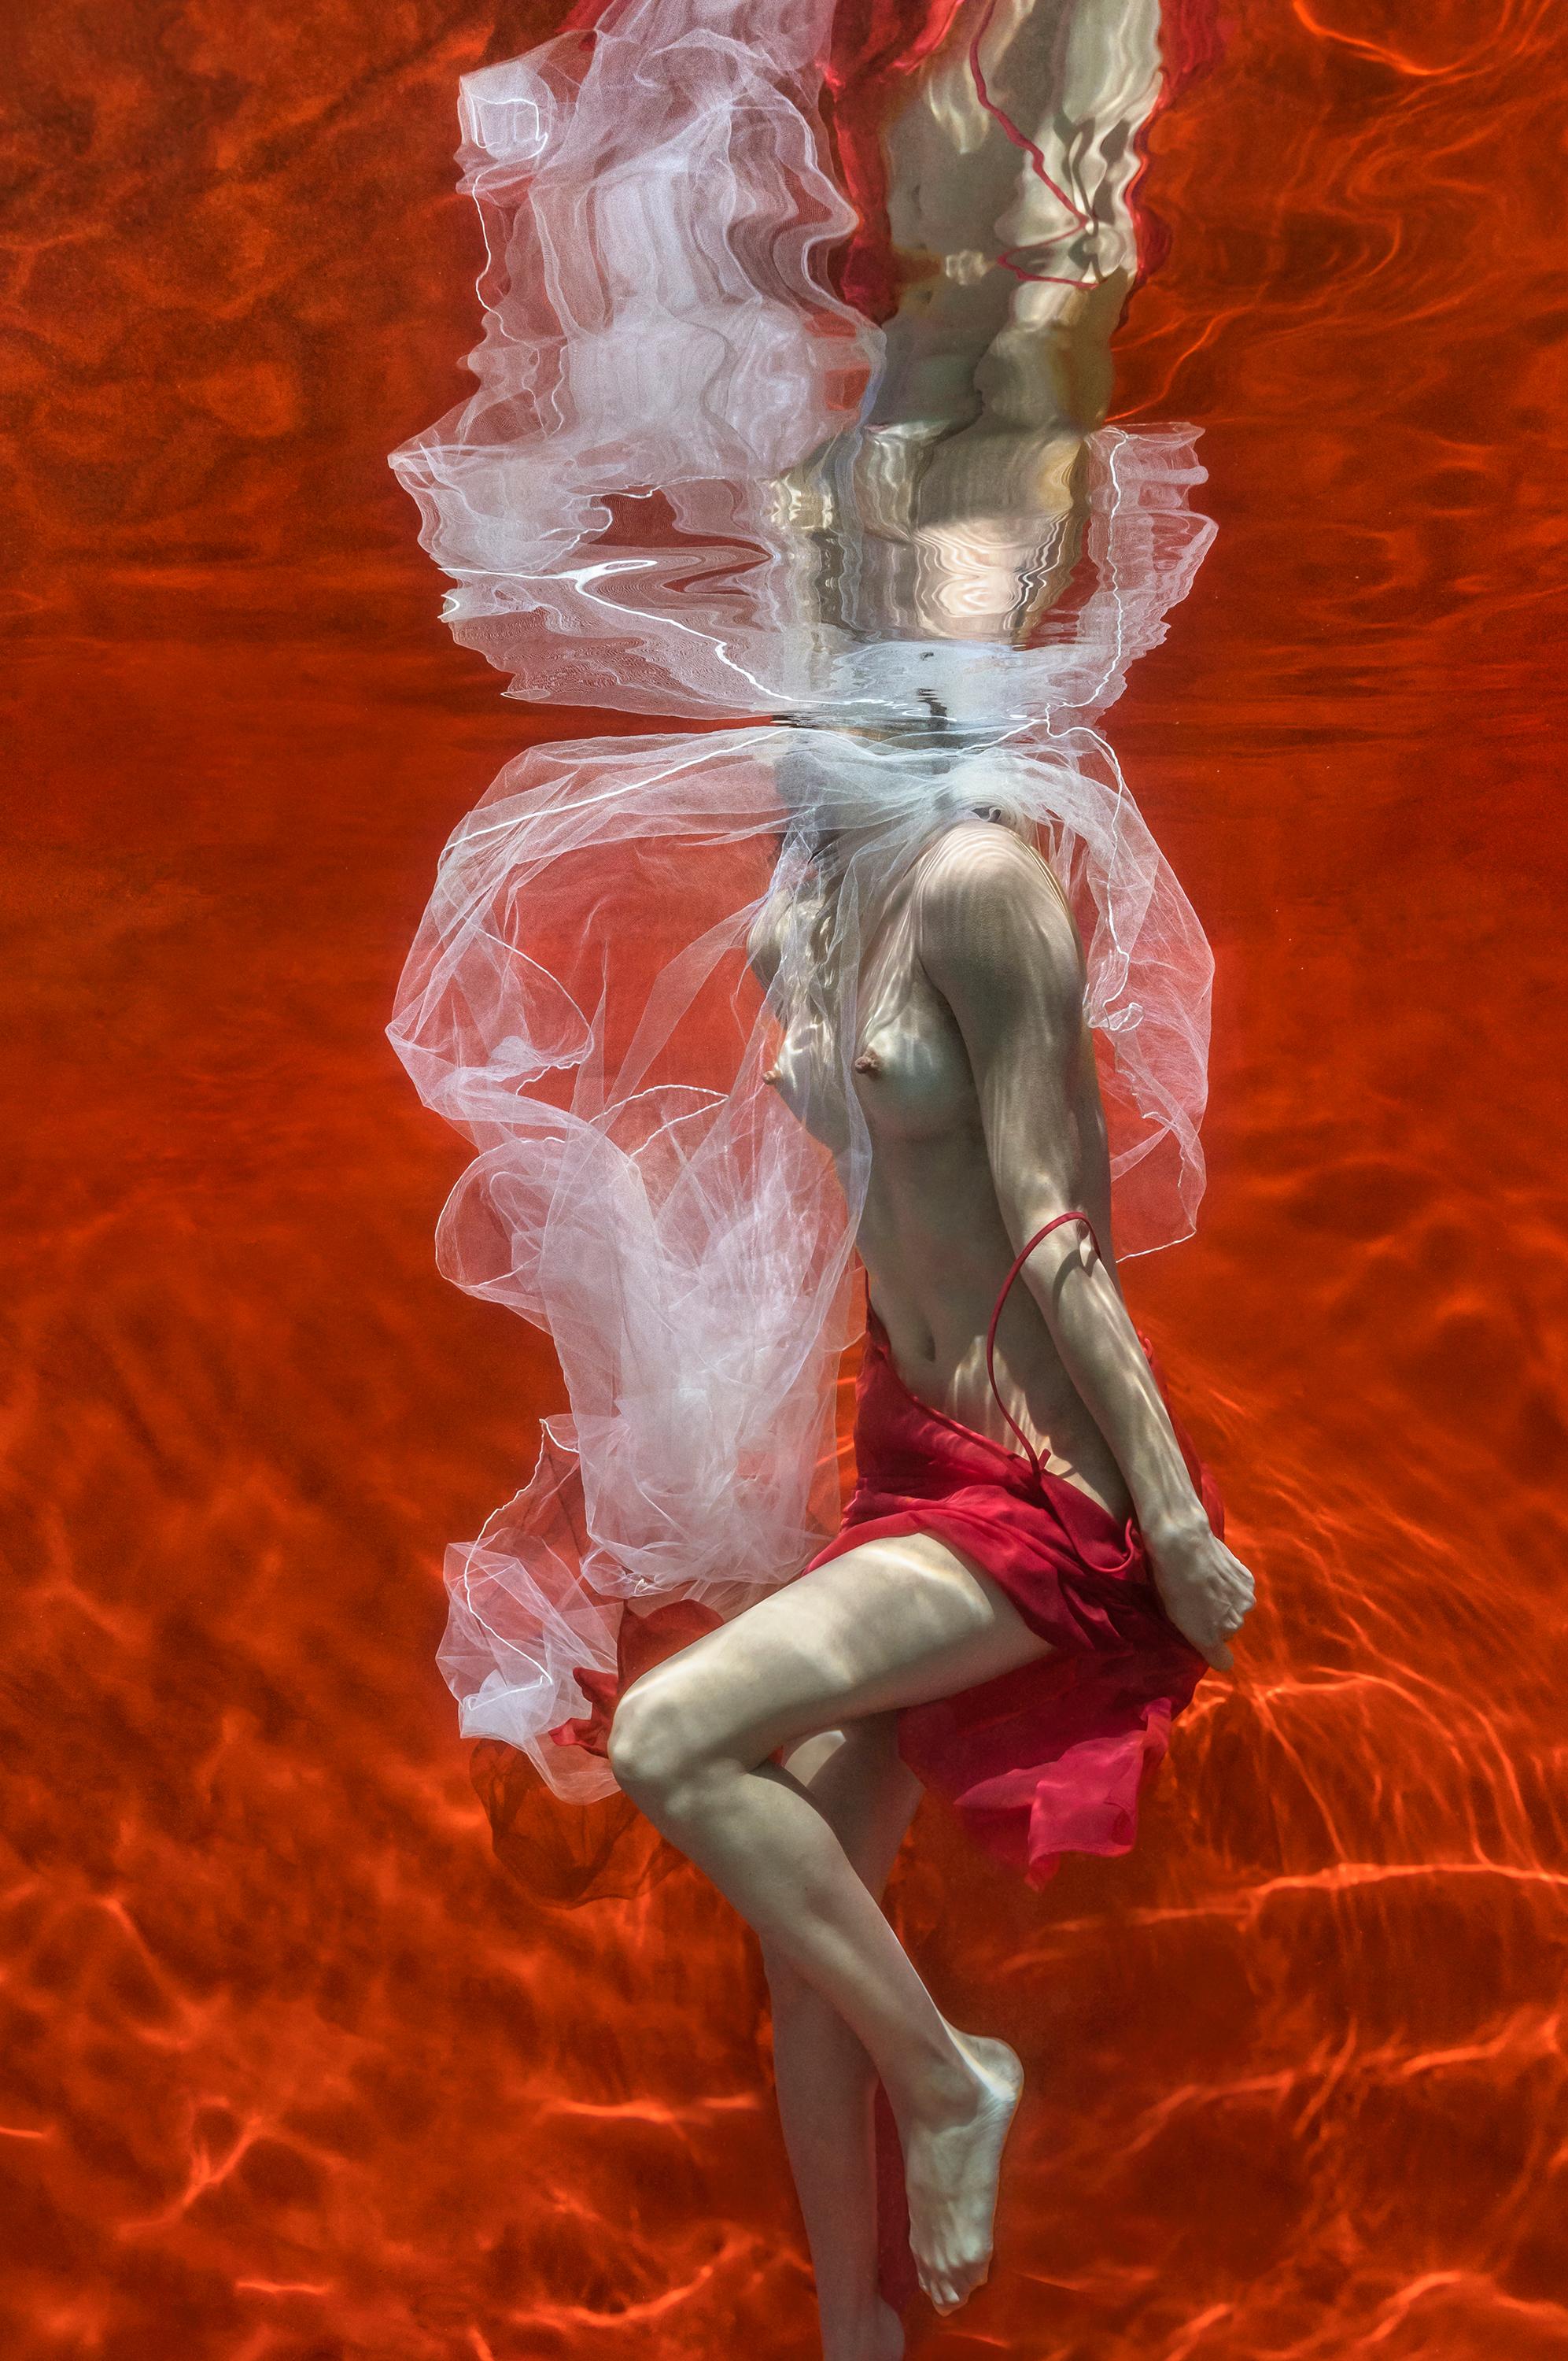 Blood and Milk III - underwater nude photograph - print on paper 48 x 35